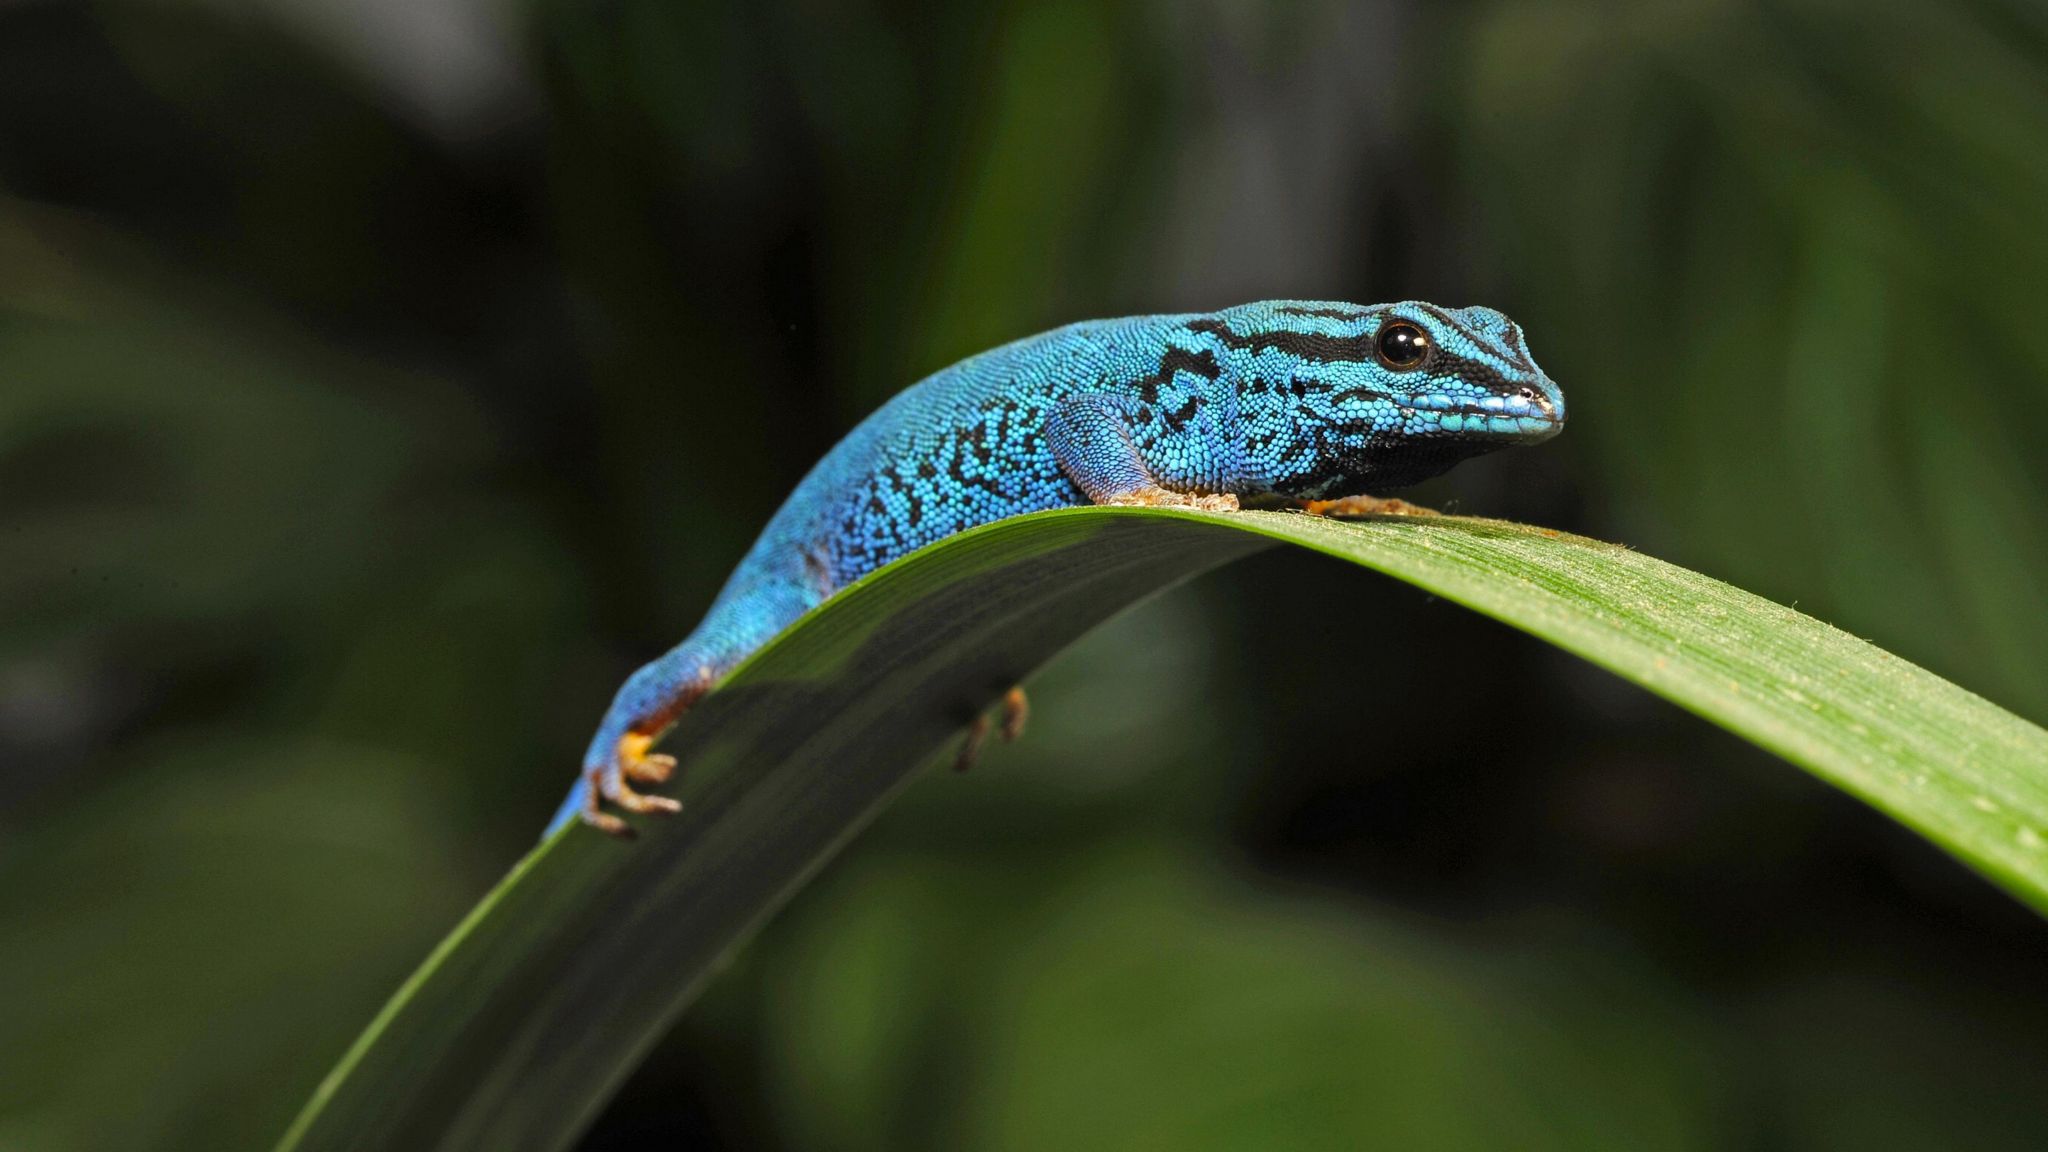 A picture of a turquoise dwarf gecko, pictured sitting on a large green leaf. The gecko is a bright turquoise and is pictured sitting on a long green leaf.  